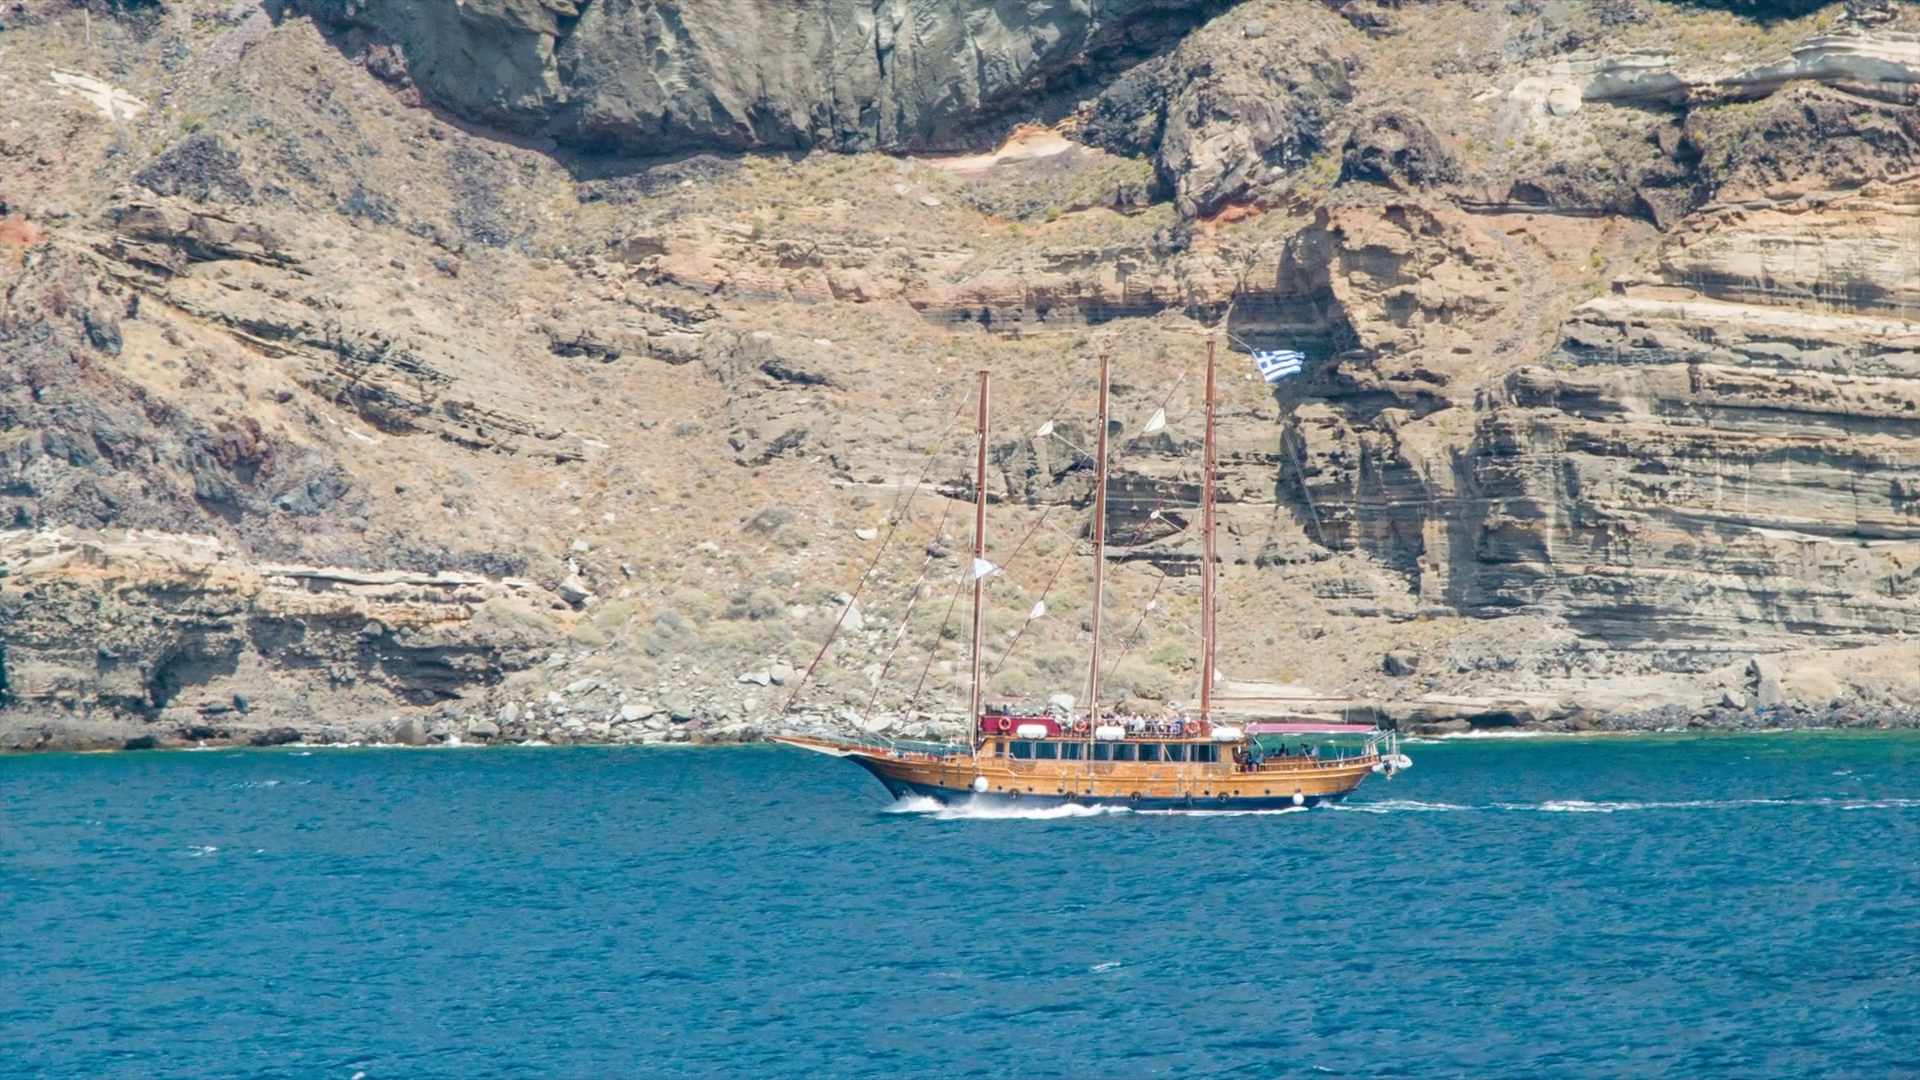 Wooden Sailboat Excursion on a Sightseeing Tour in Santorini Greece ...